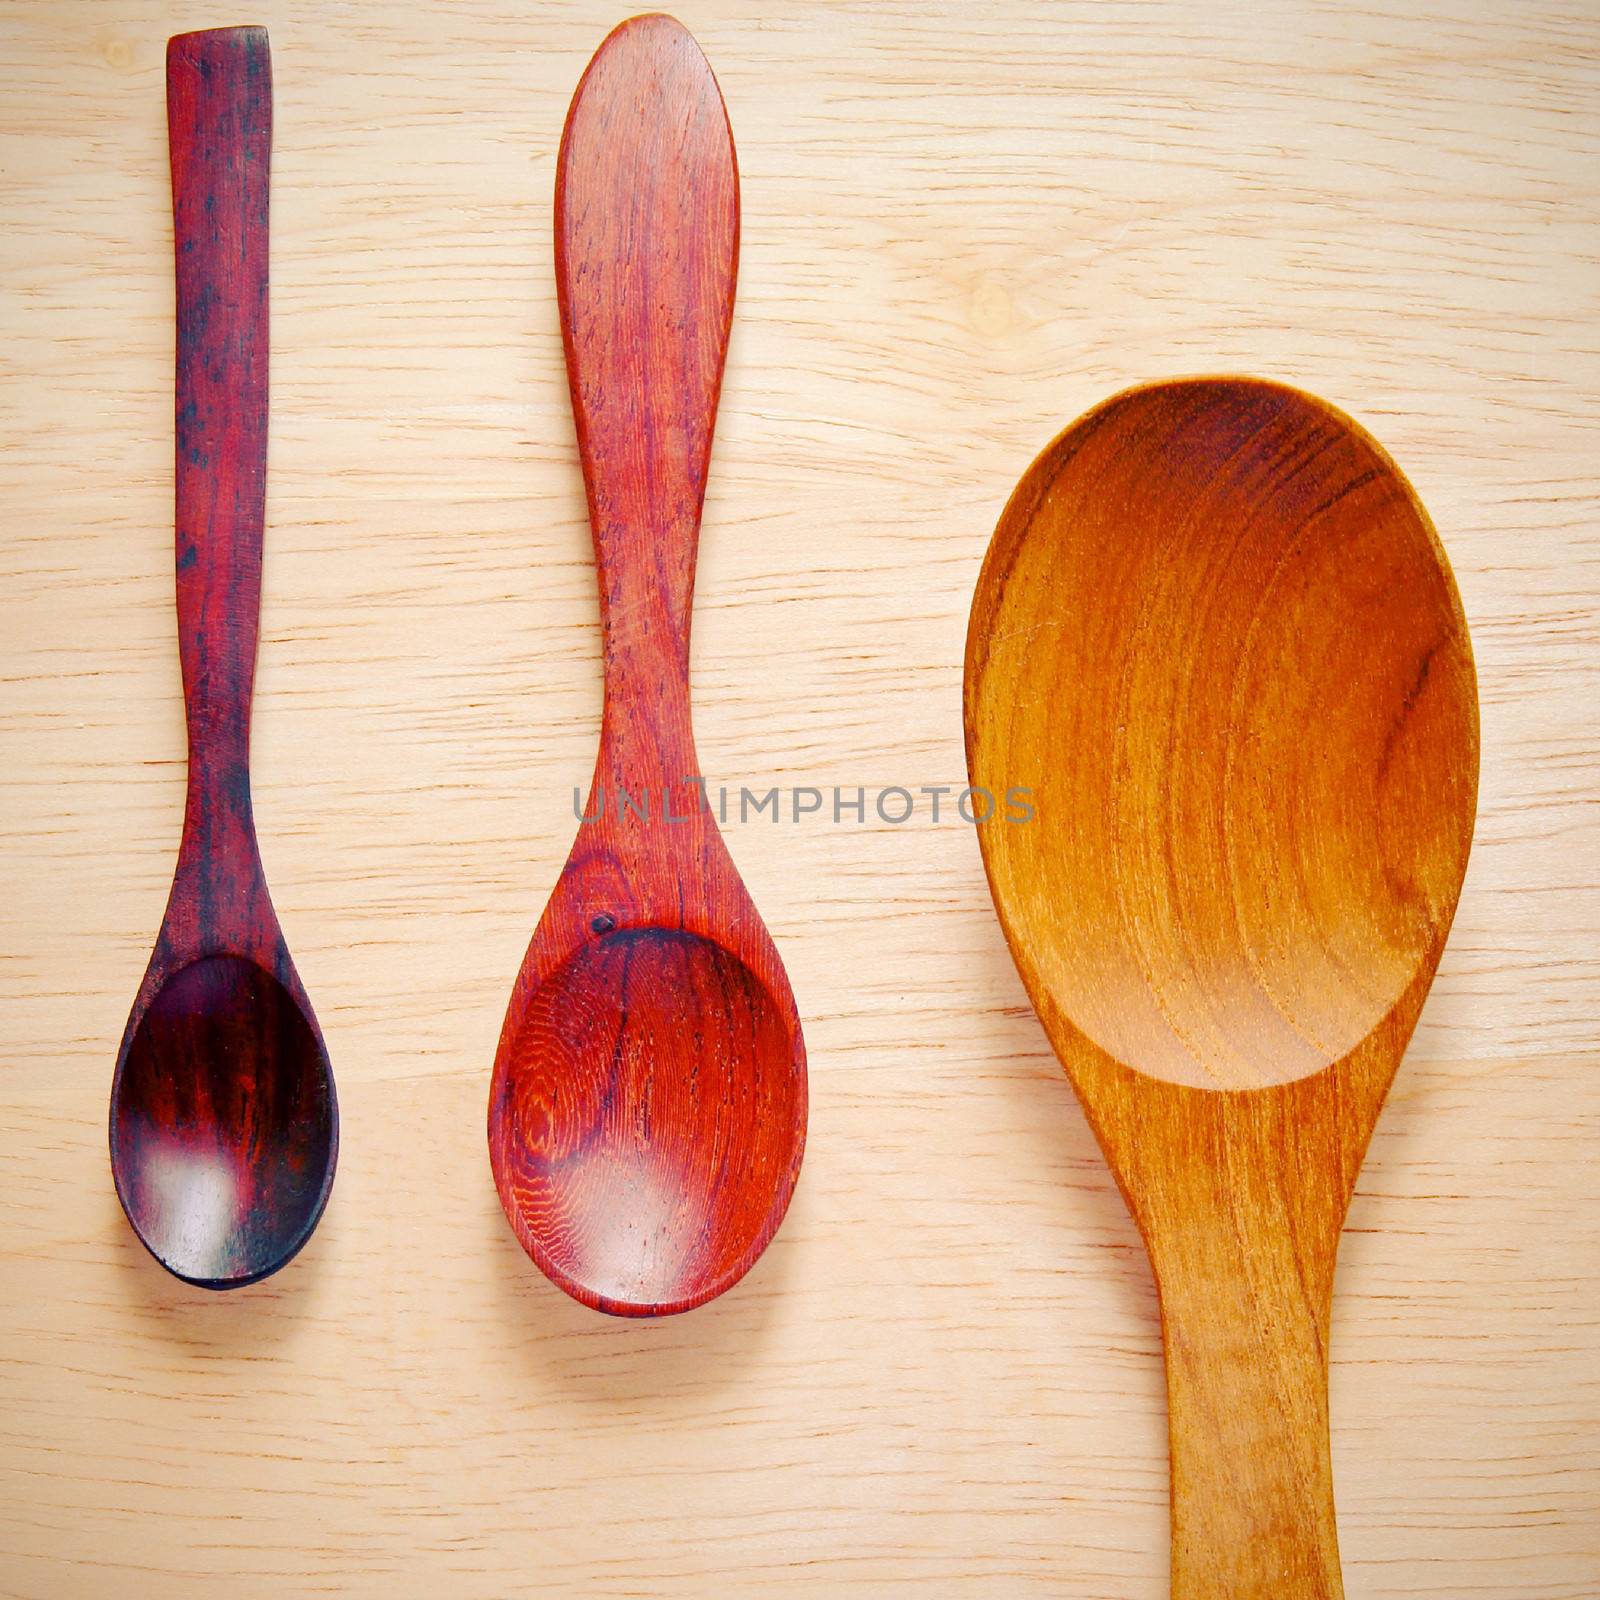 Collection of wooden kitchen spoons with retro filter effect